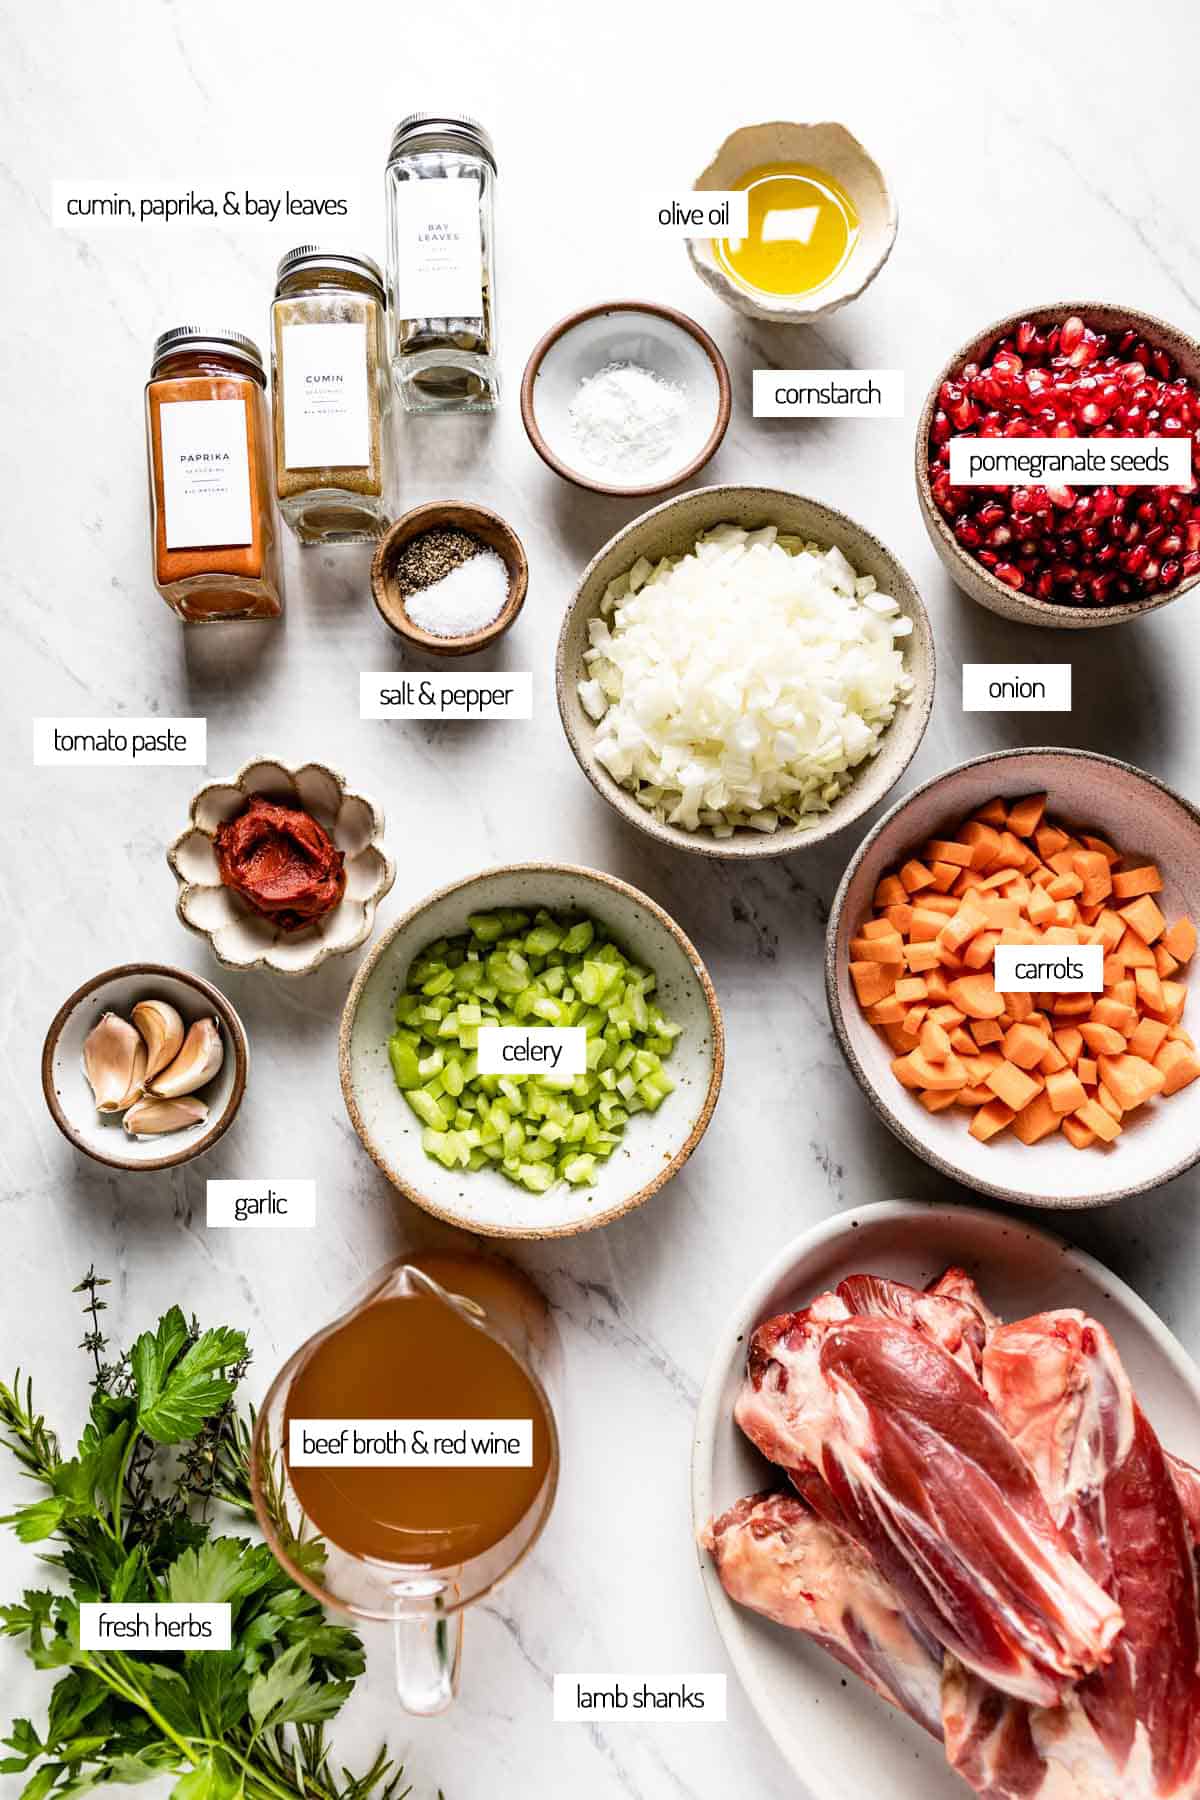 Ingredients for lamb shanks cooked in an instant pot from the top view.